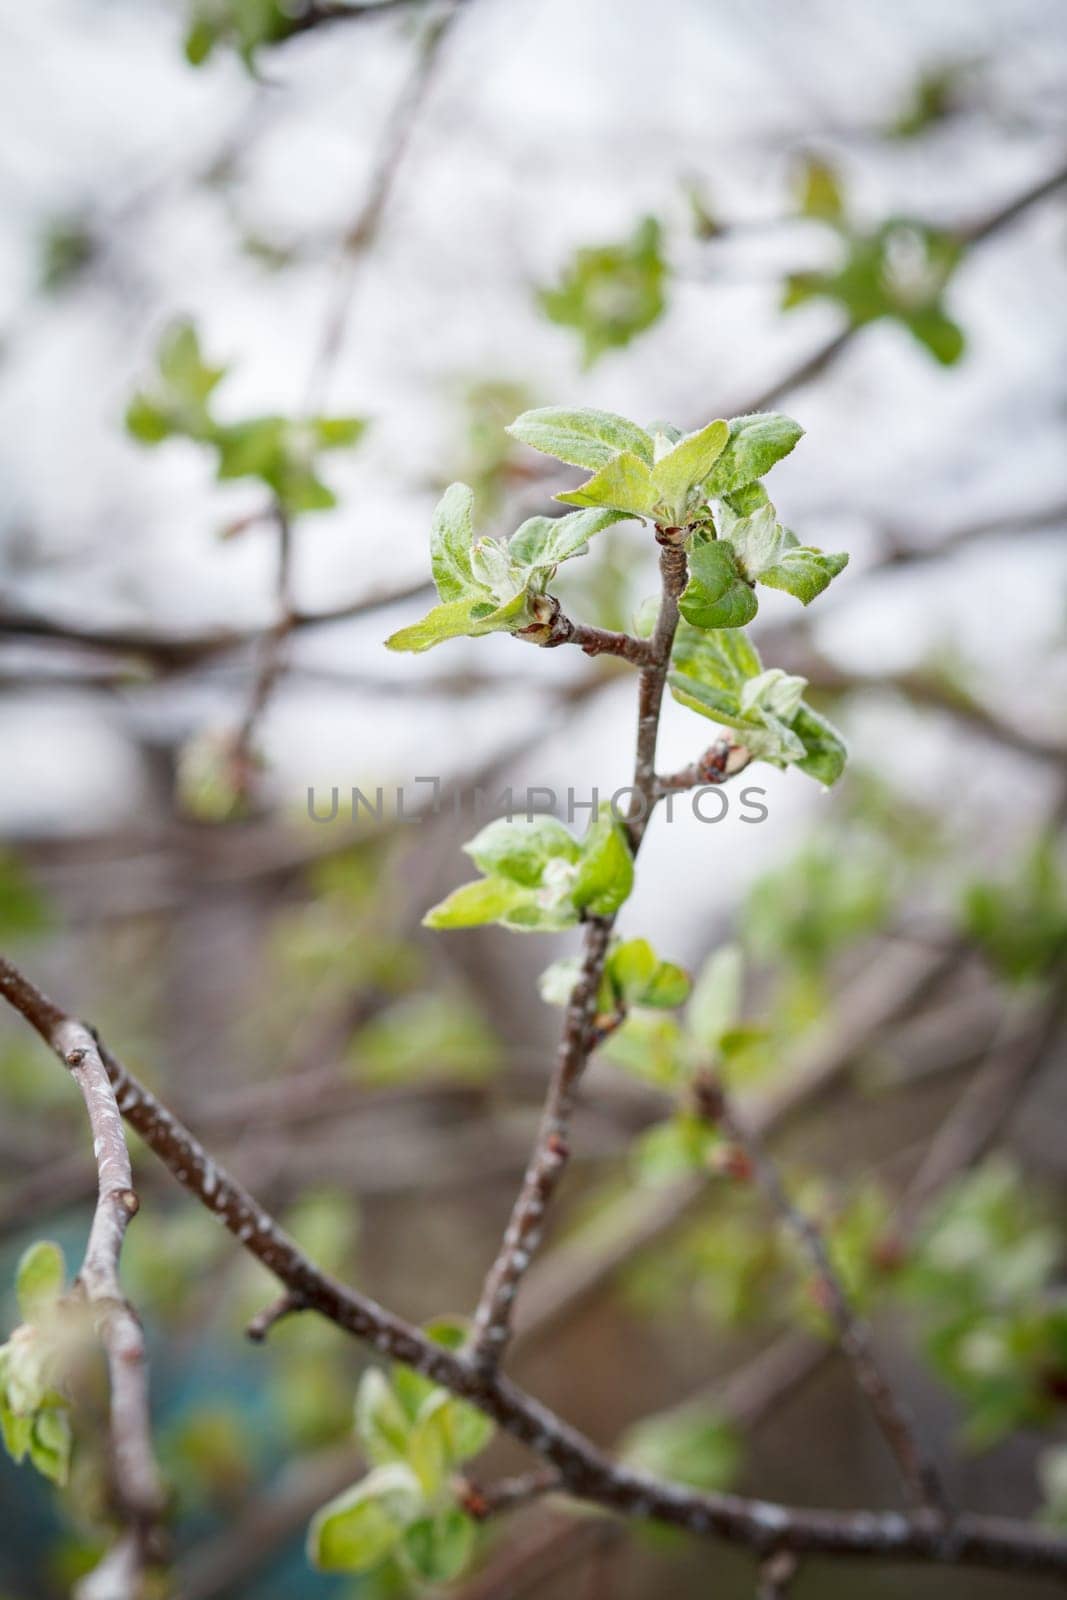 Branch of apple tree with young green leaves in early spring on blurred background. Selective focus on leaves.